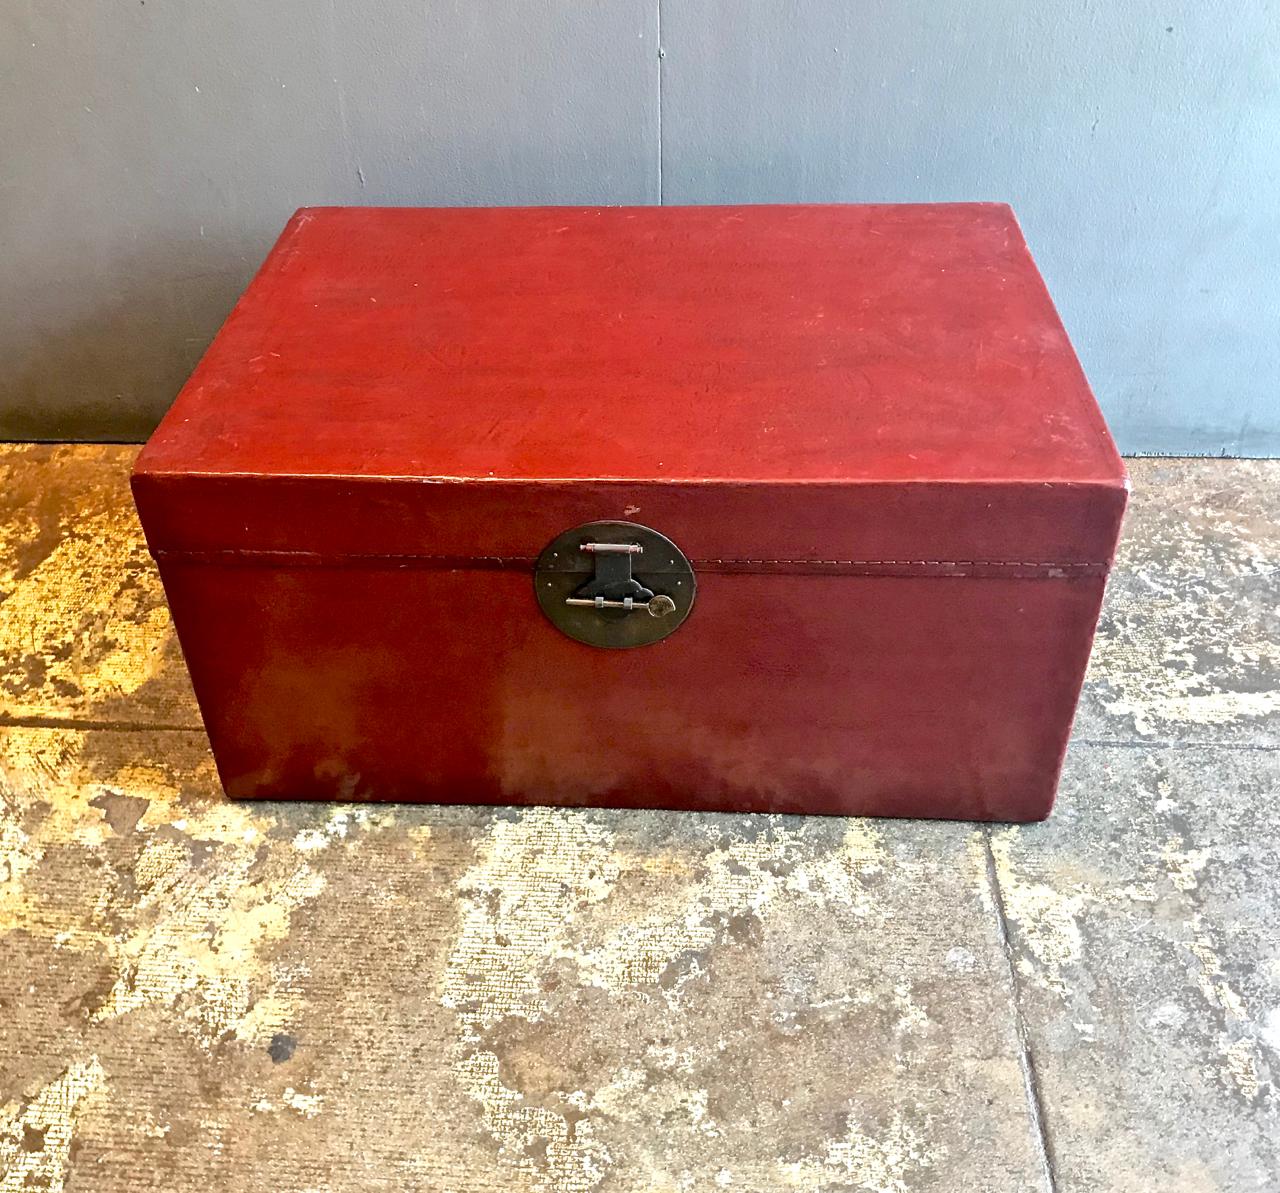 This is a Classic Chinese lacquered pigskin trunk that dates to the early 20th century. The cinnabar red lacquer is in very good condition considering its age and use. The interior is also in good condition. Normal patination for age and use.